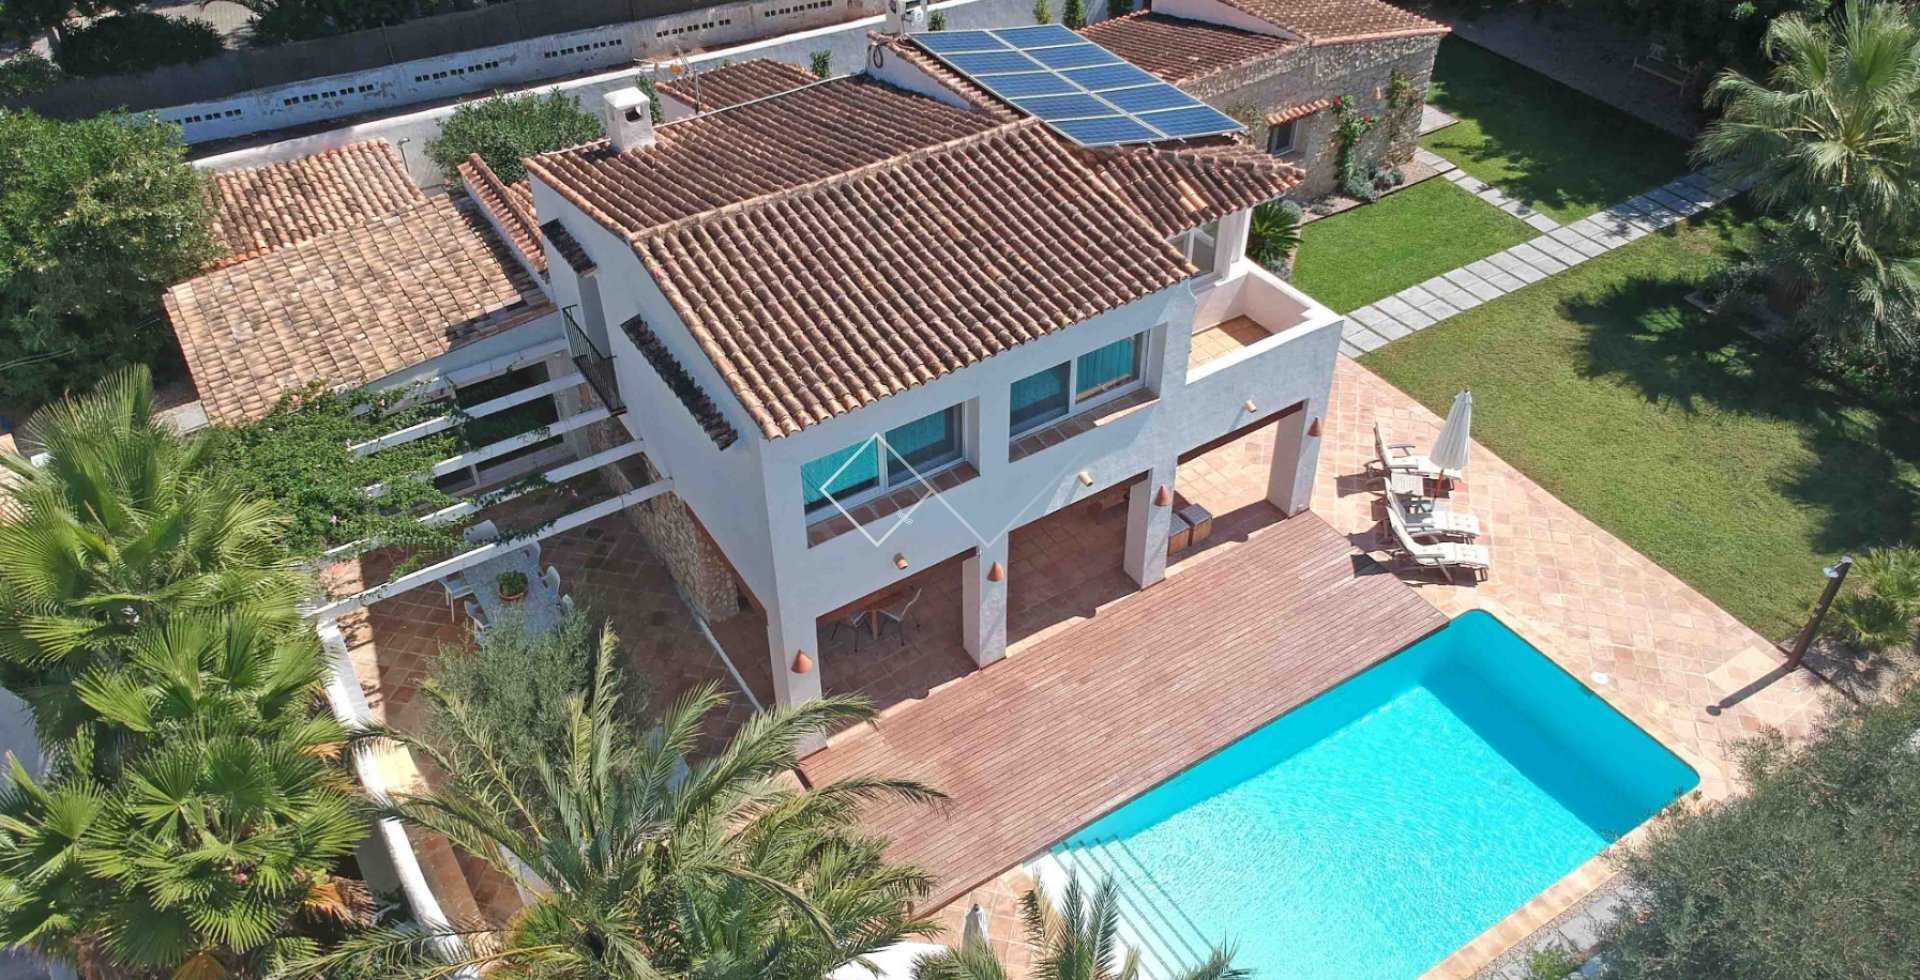 bird view - For sale: superb villa in El Portet, Moraira only 300m from the beach